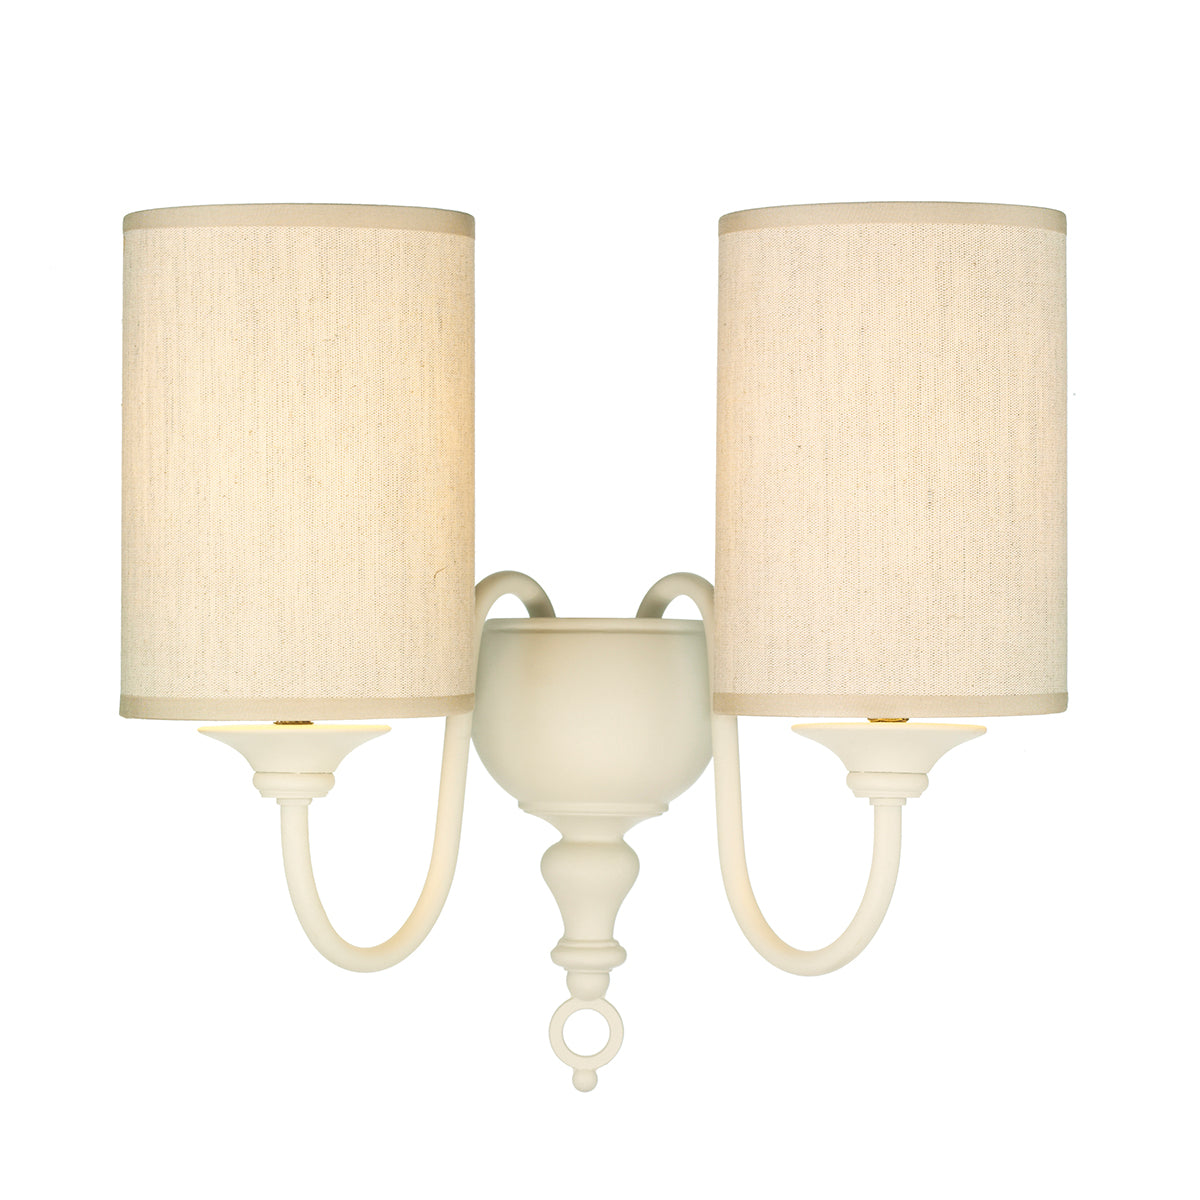 David Hunt Lighting Flemish Double Wall Light Cream Complete with Shades FLE0933